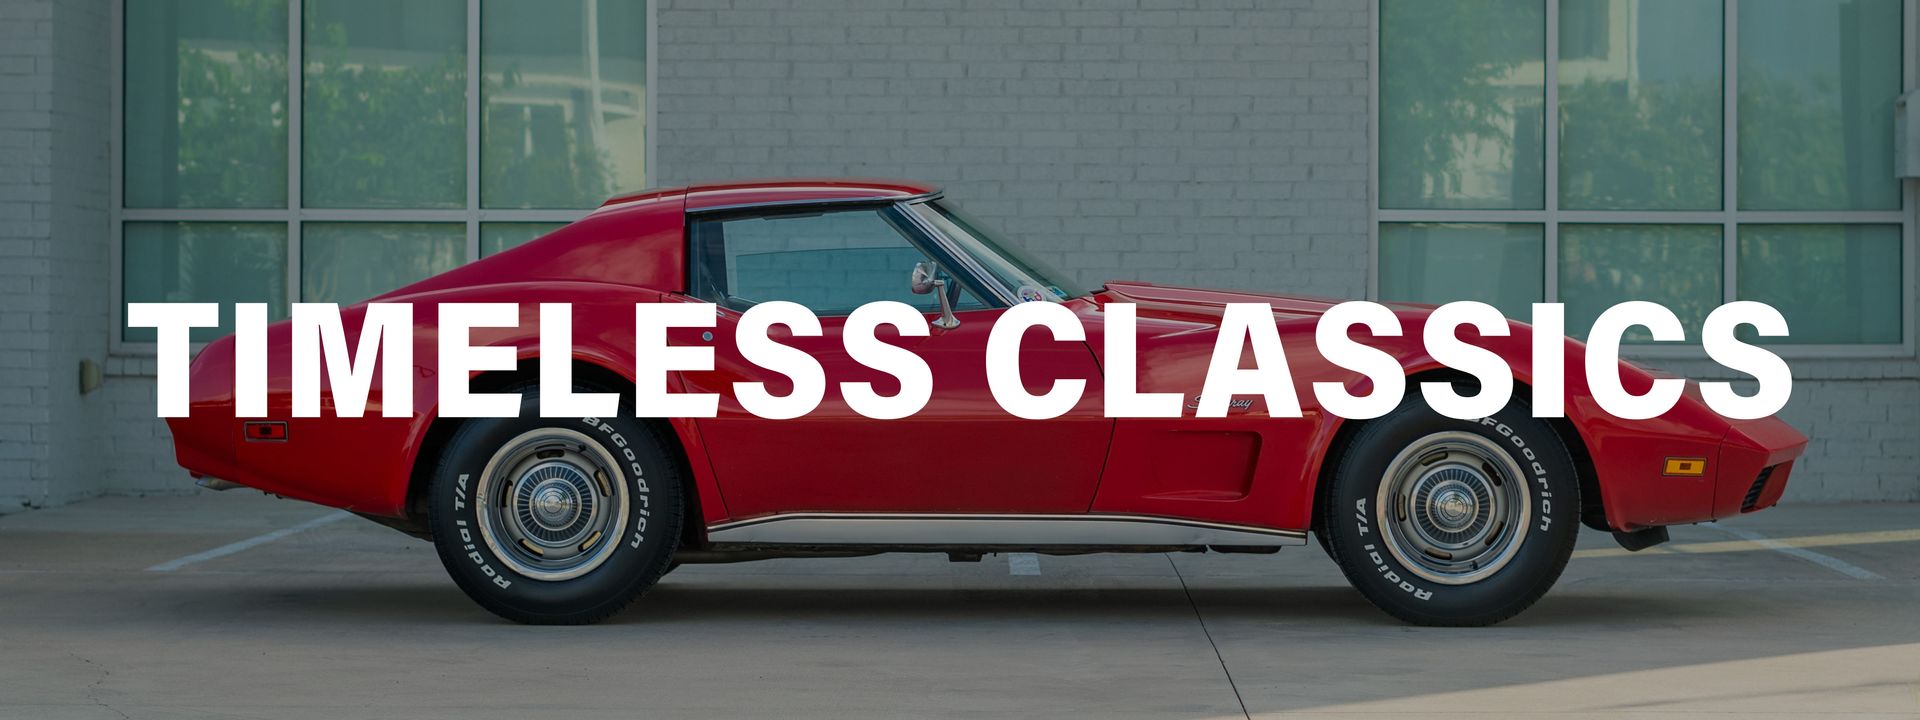 A red car is parked in front of a building with the words timeless classics above it.